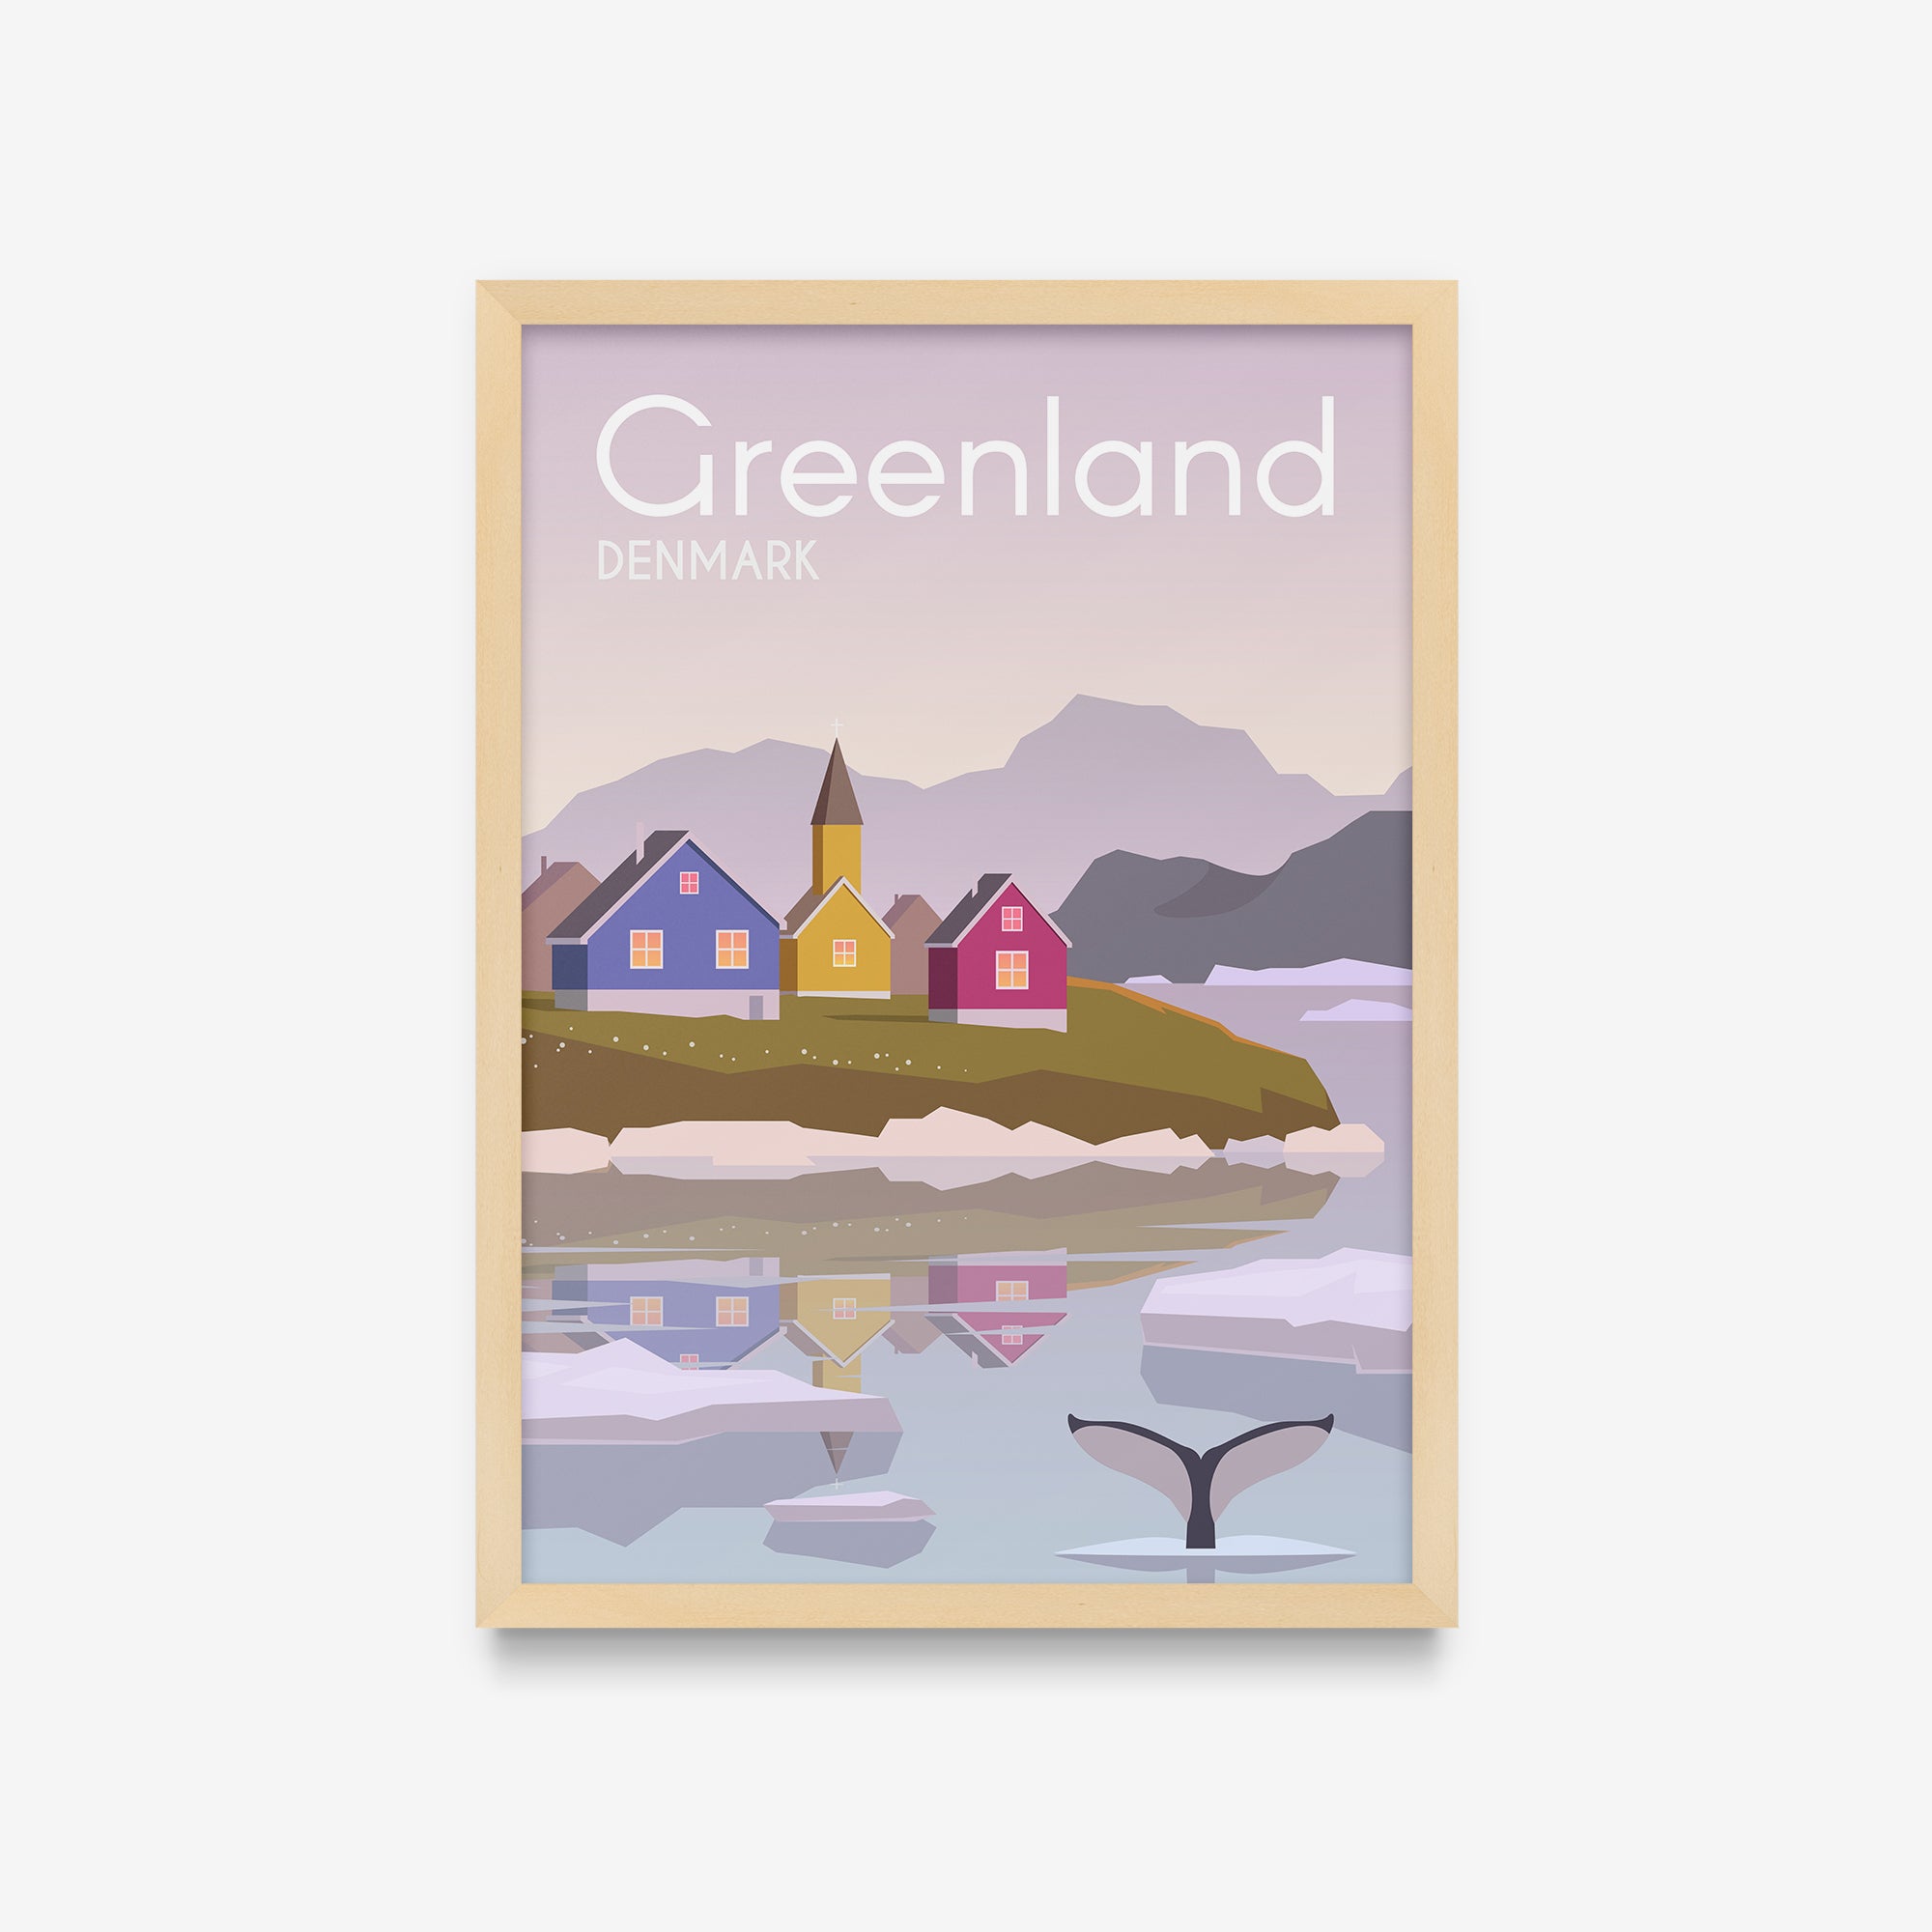 Travel Posters - Greenland